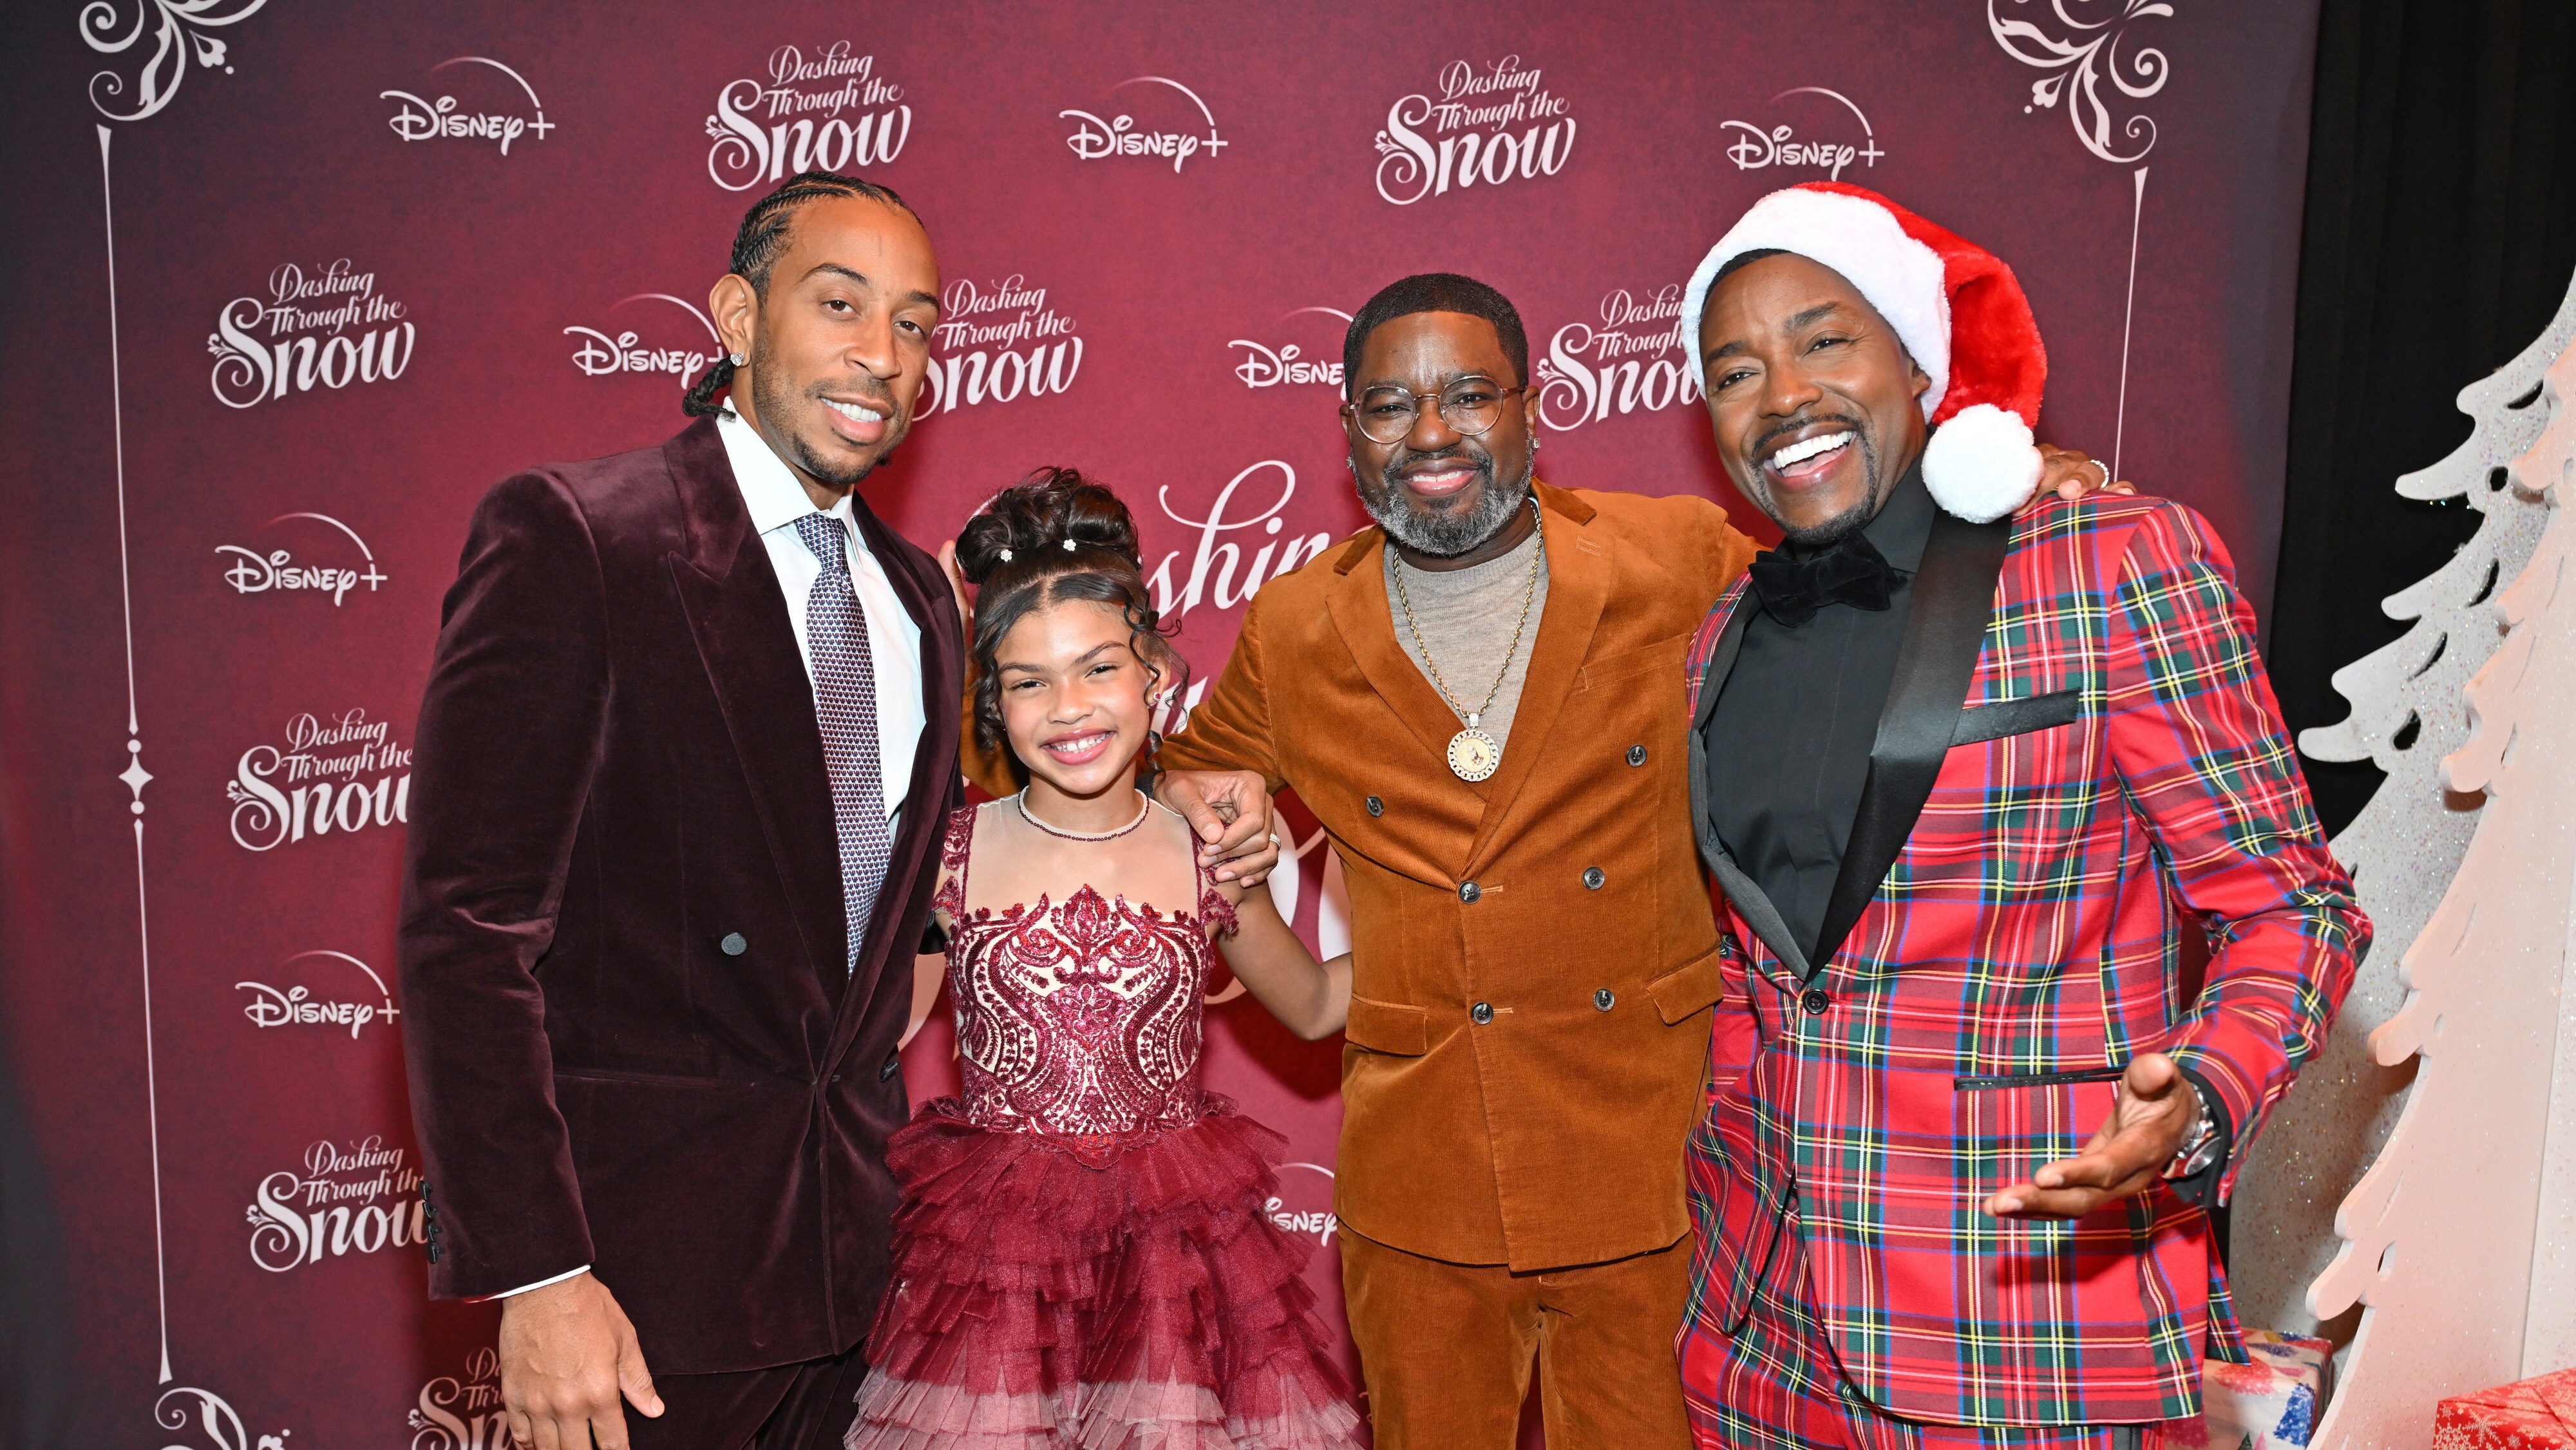 Disney Kicks Off The Holidays With Special Screening Of “Dashing Through The Snow” In Atlanta